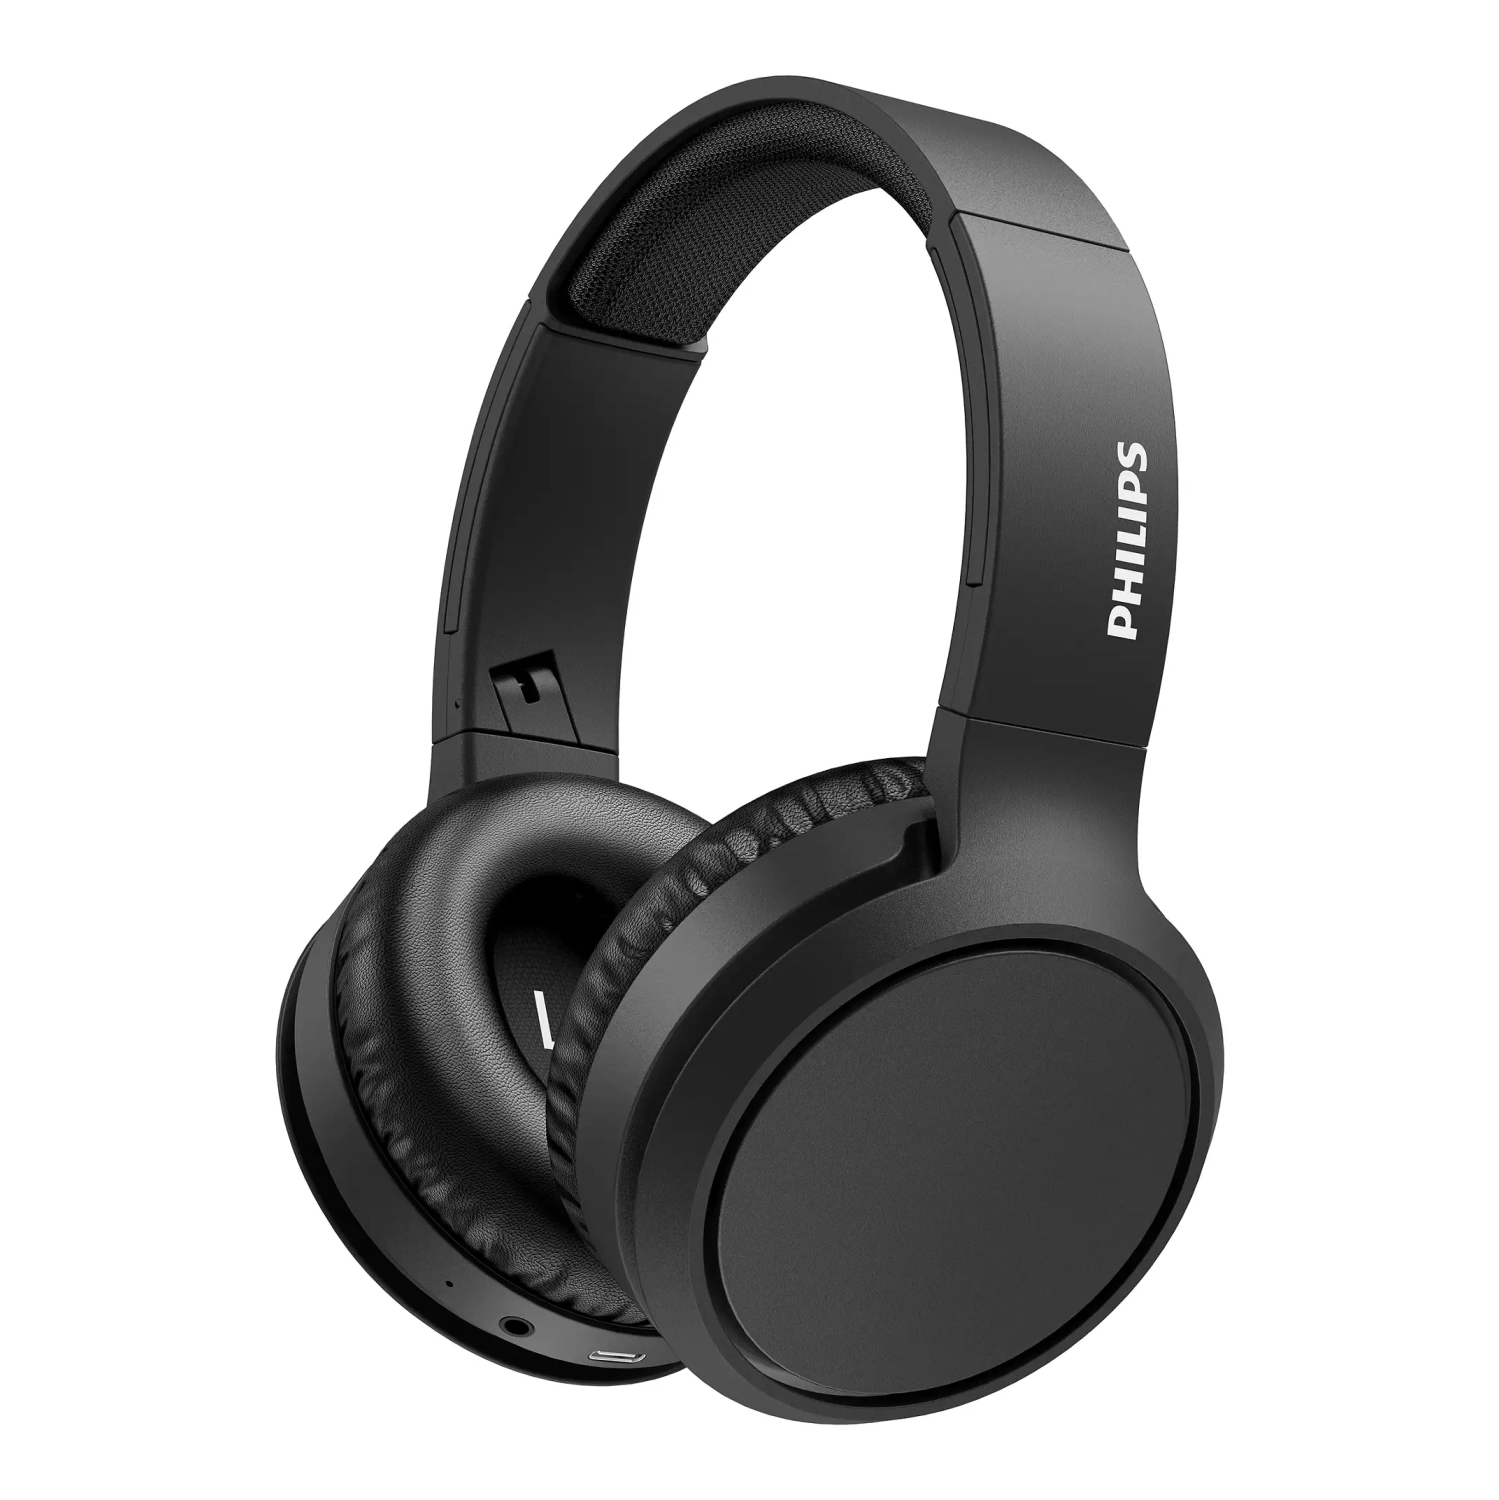 Philips H5205 Over-Ear Wireless Headphones with 40mm Drivers & BASS Boost on-Demand, Black